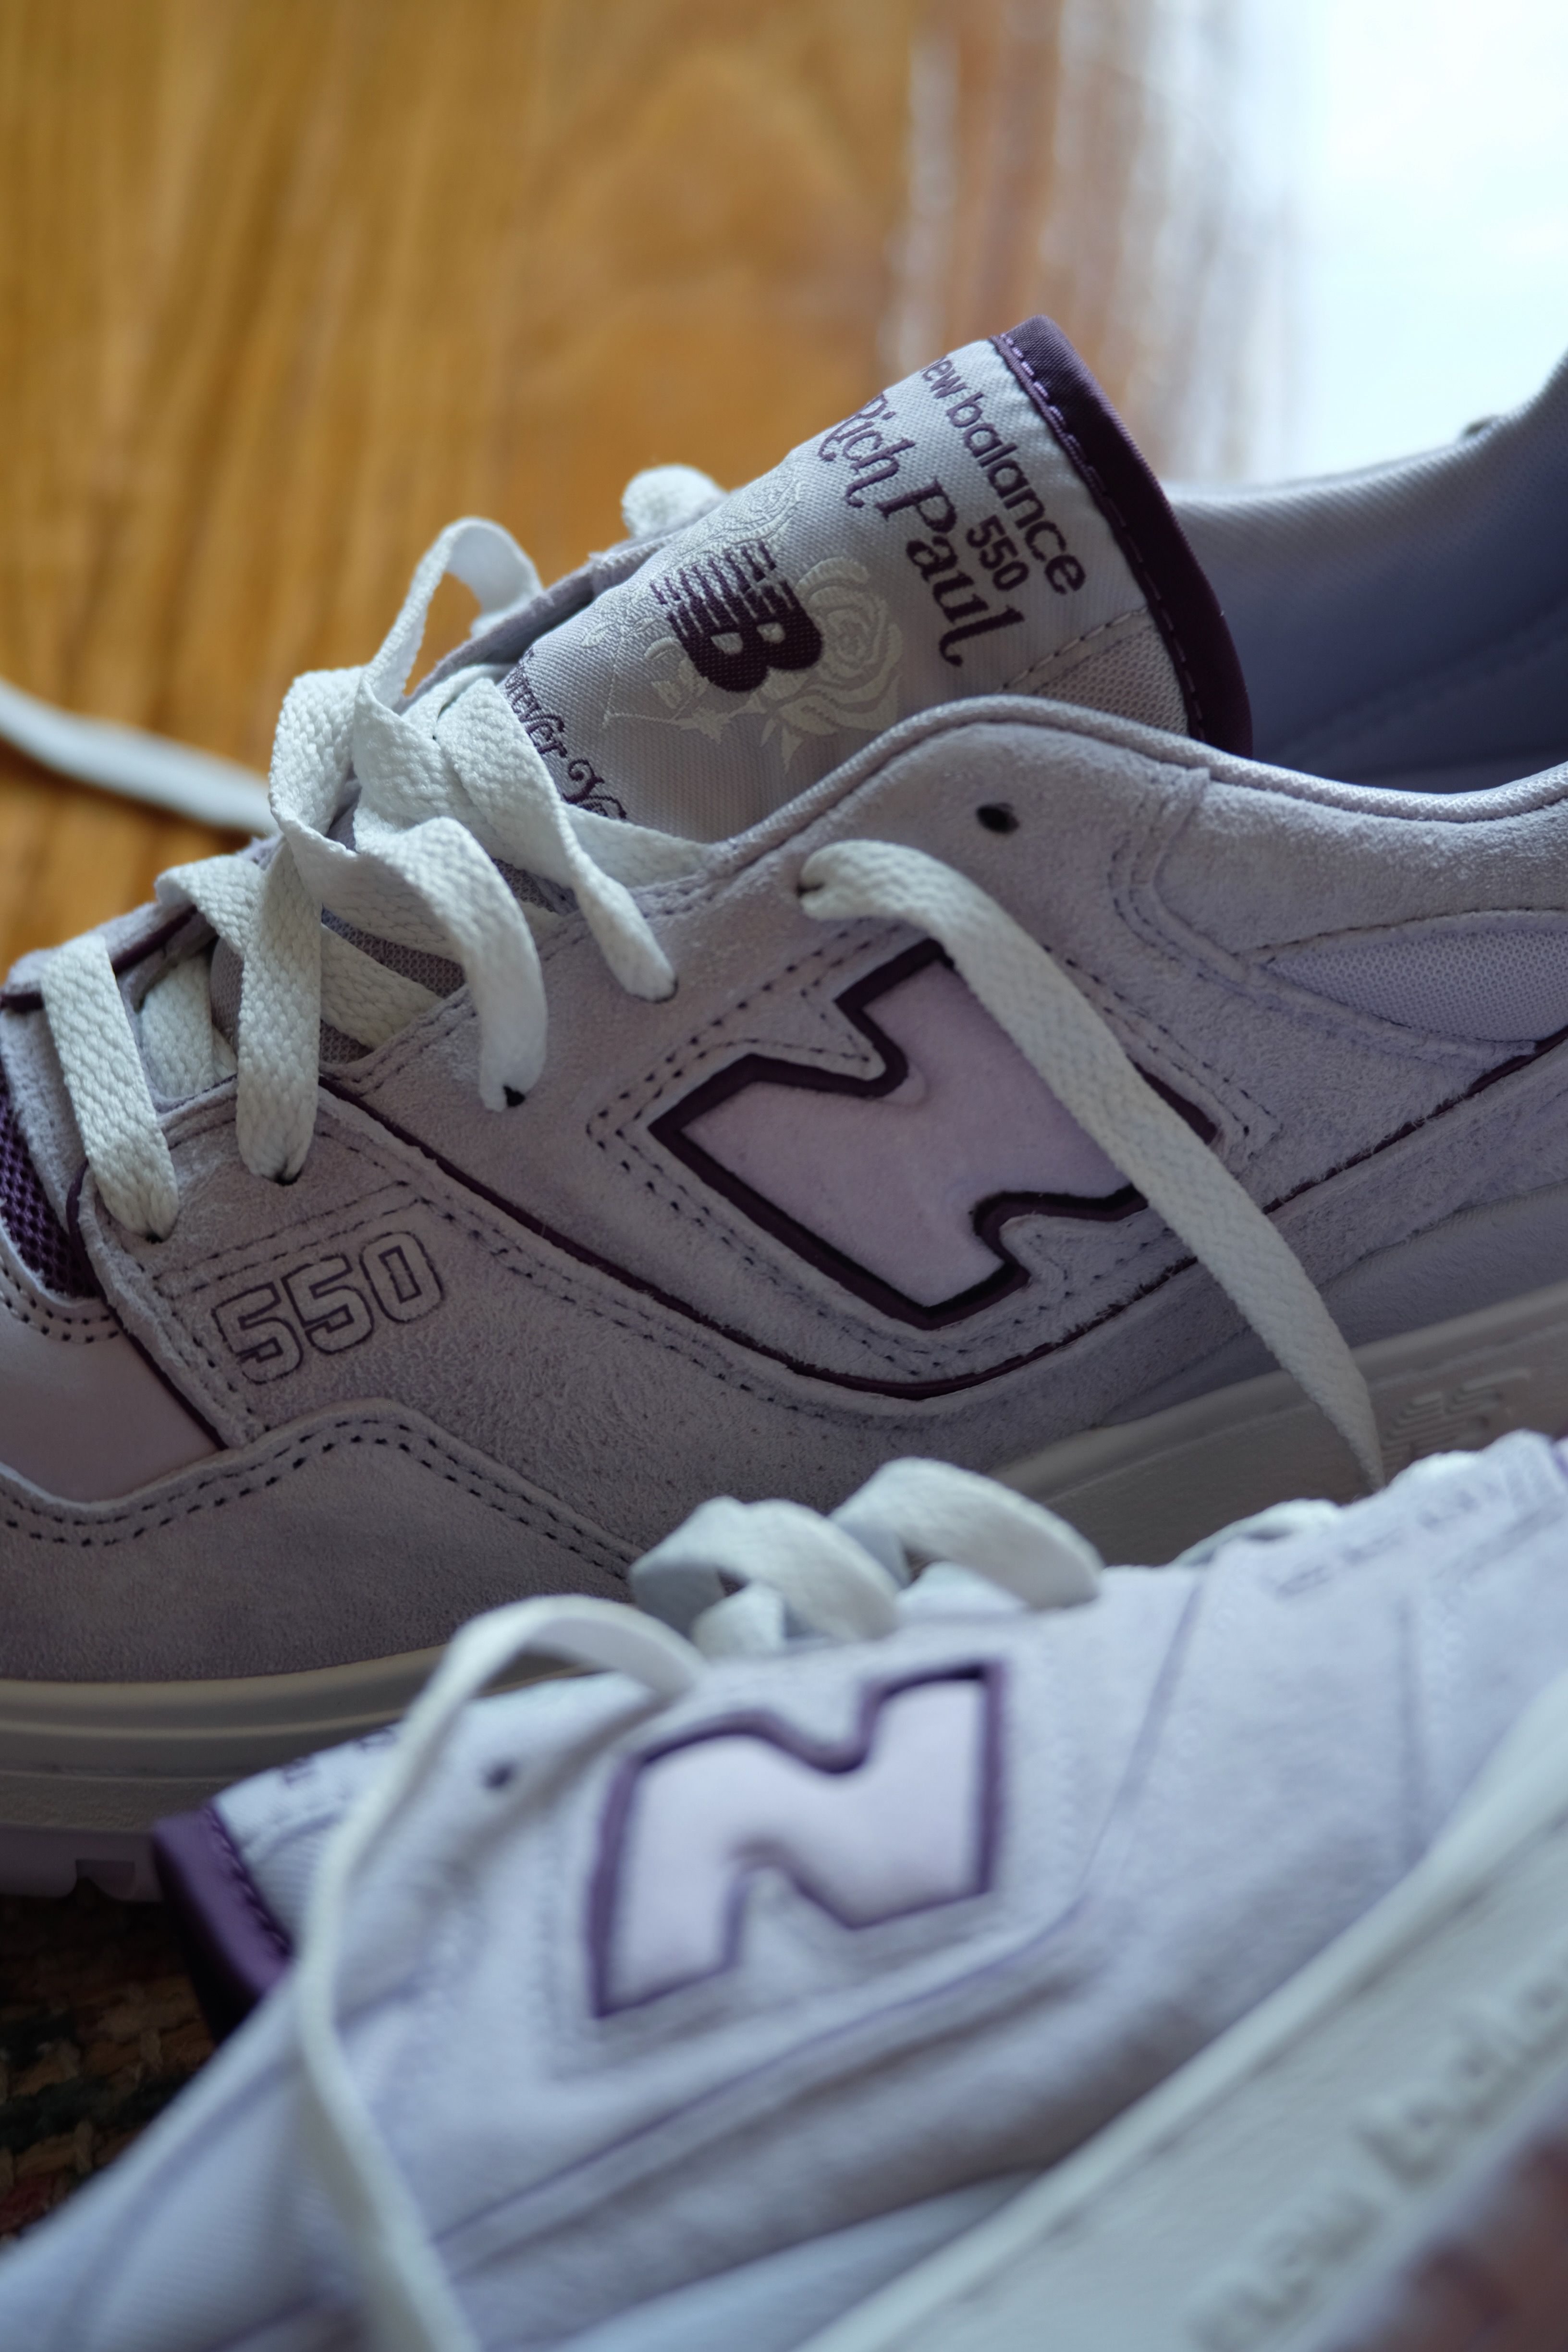 Rich Paul on New Balance 550 Forever Yours Collaboration